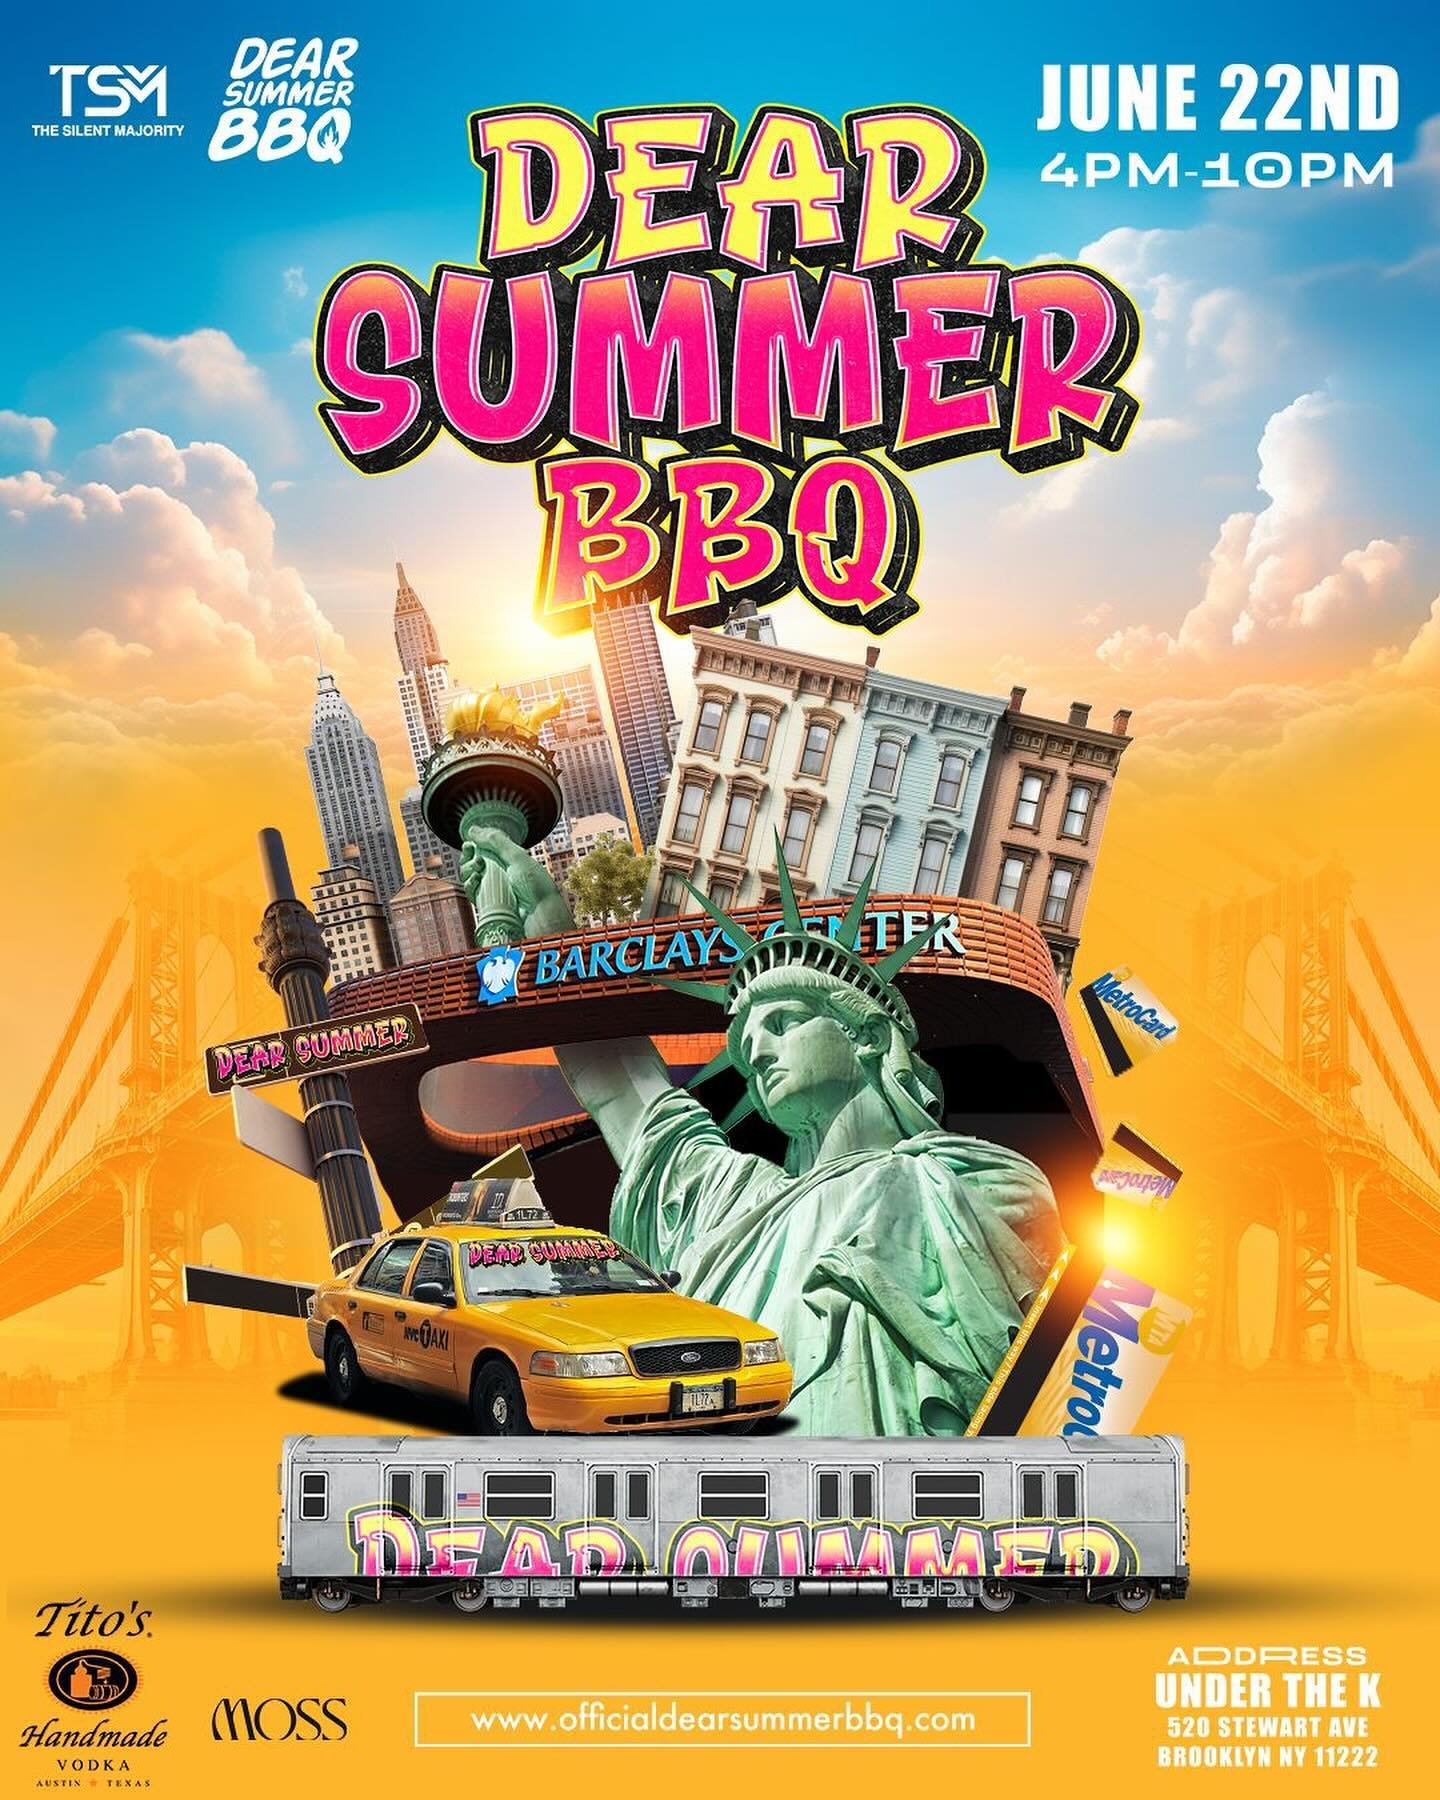 Summer Is Just A Little Over A Month Away 😎. . . 

And The Only Way To Kick Off Summer Is With #DearSummerBBQ ‼️

This Time Around We&rsquo;re At A New Location But The Great Vibes You&rsquo;ve Come To Know &amp; Love Remain The Same 🫶🏾

And Just 